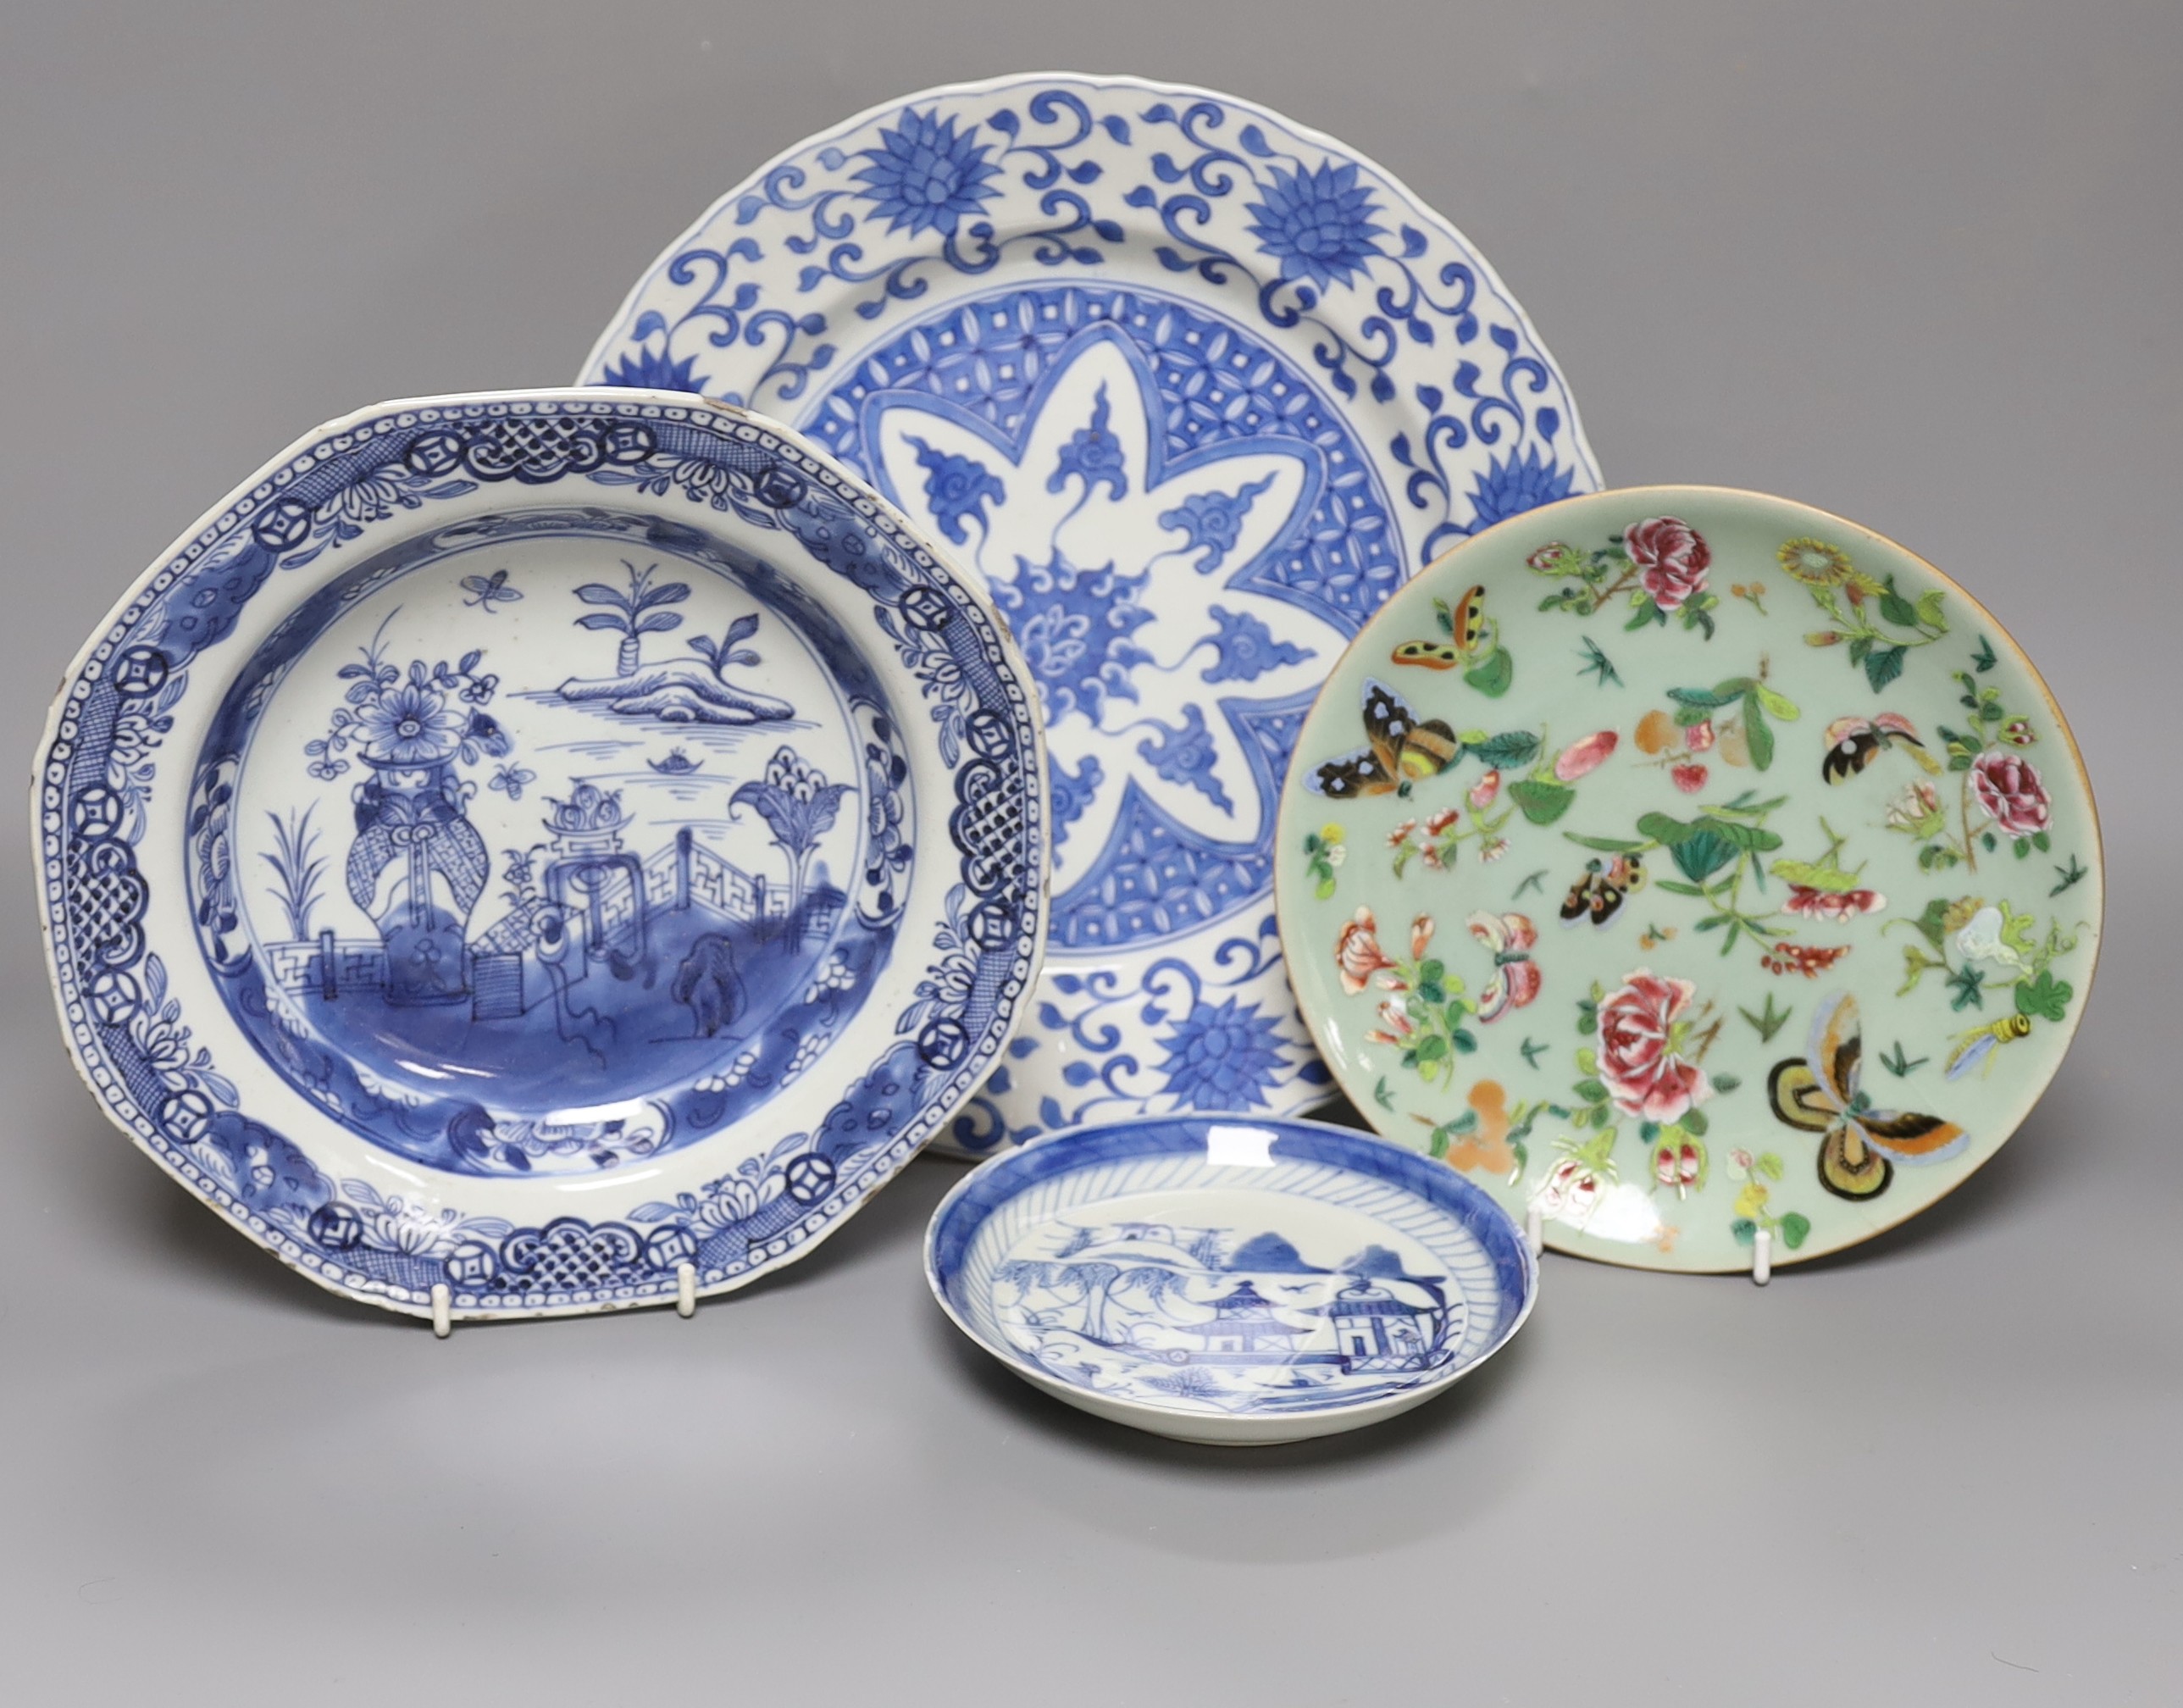 Four Chinese porcelain plates or dishes, 18th century and later, the largest 27.5 cm